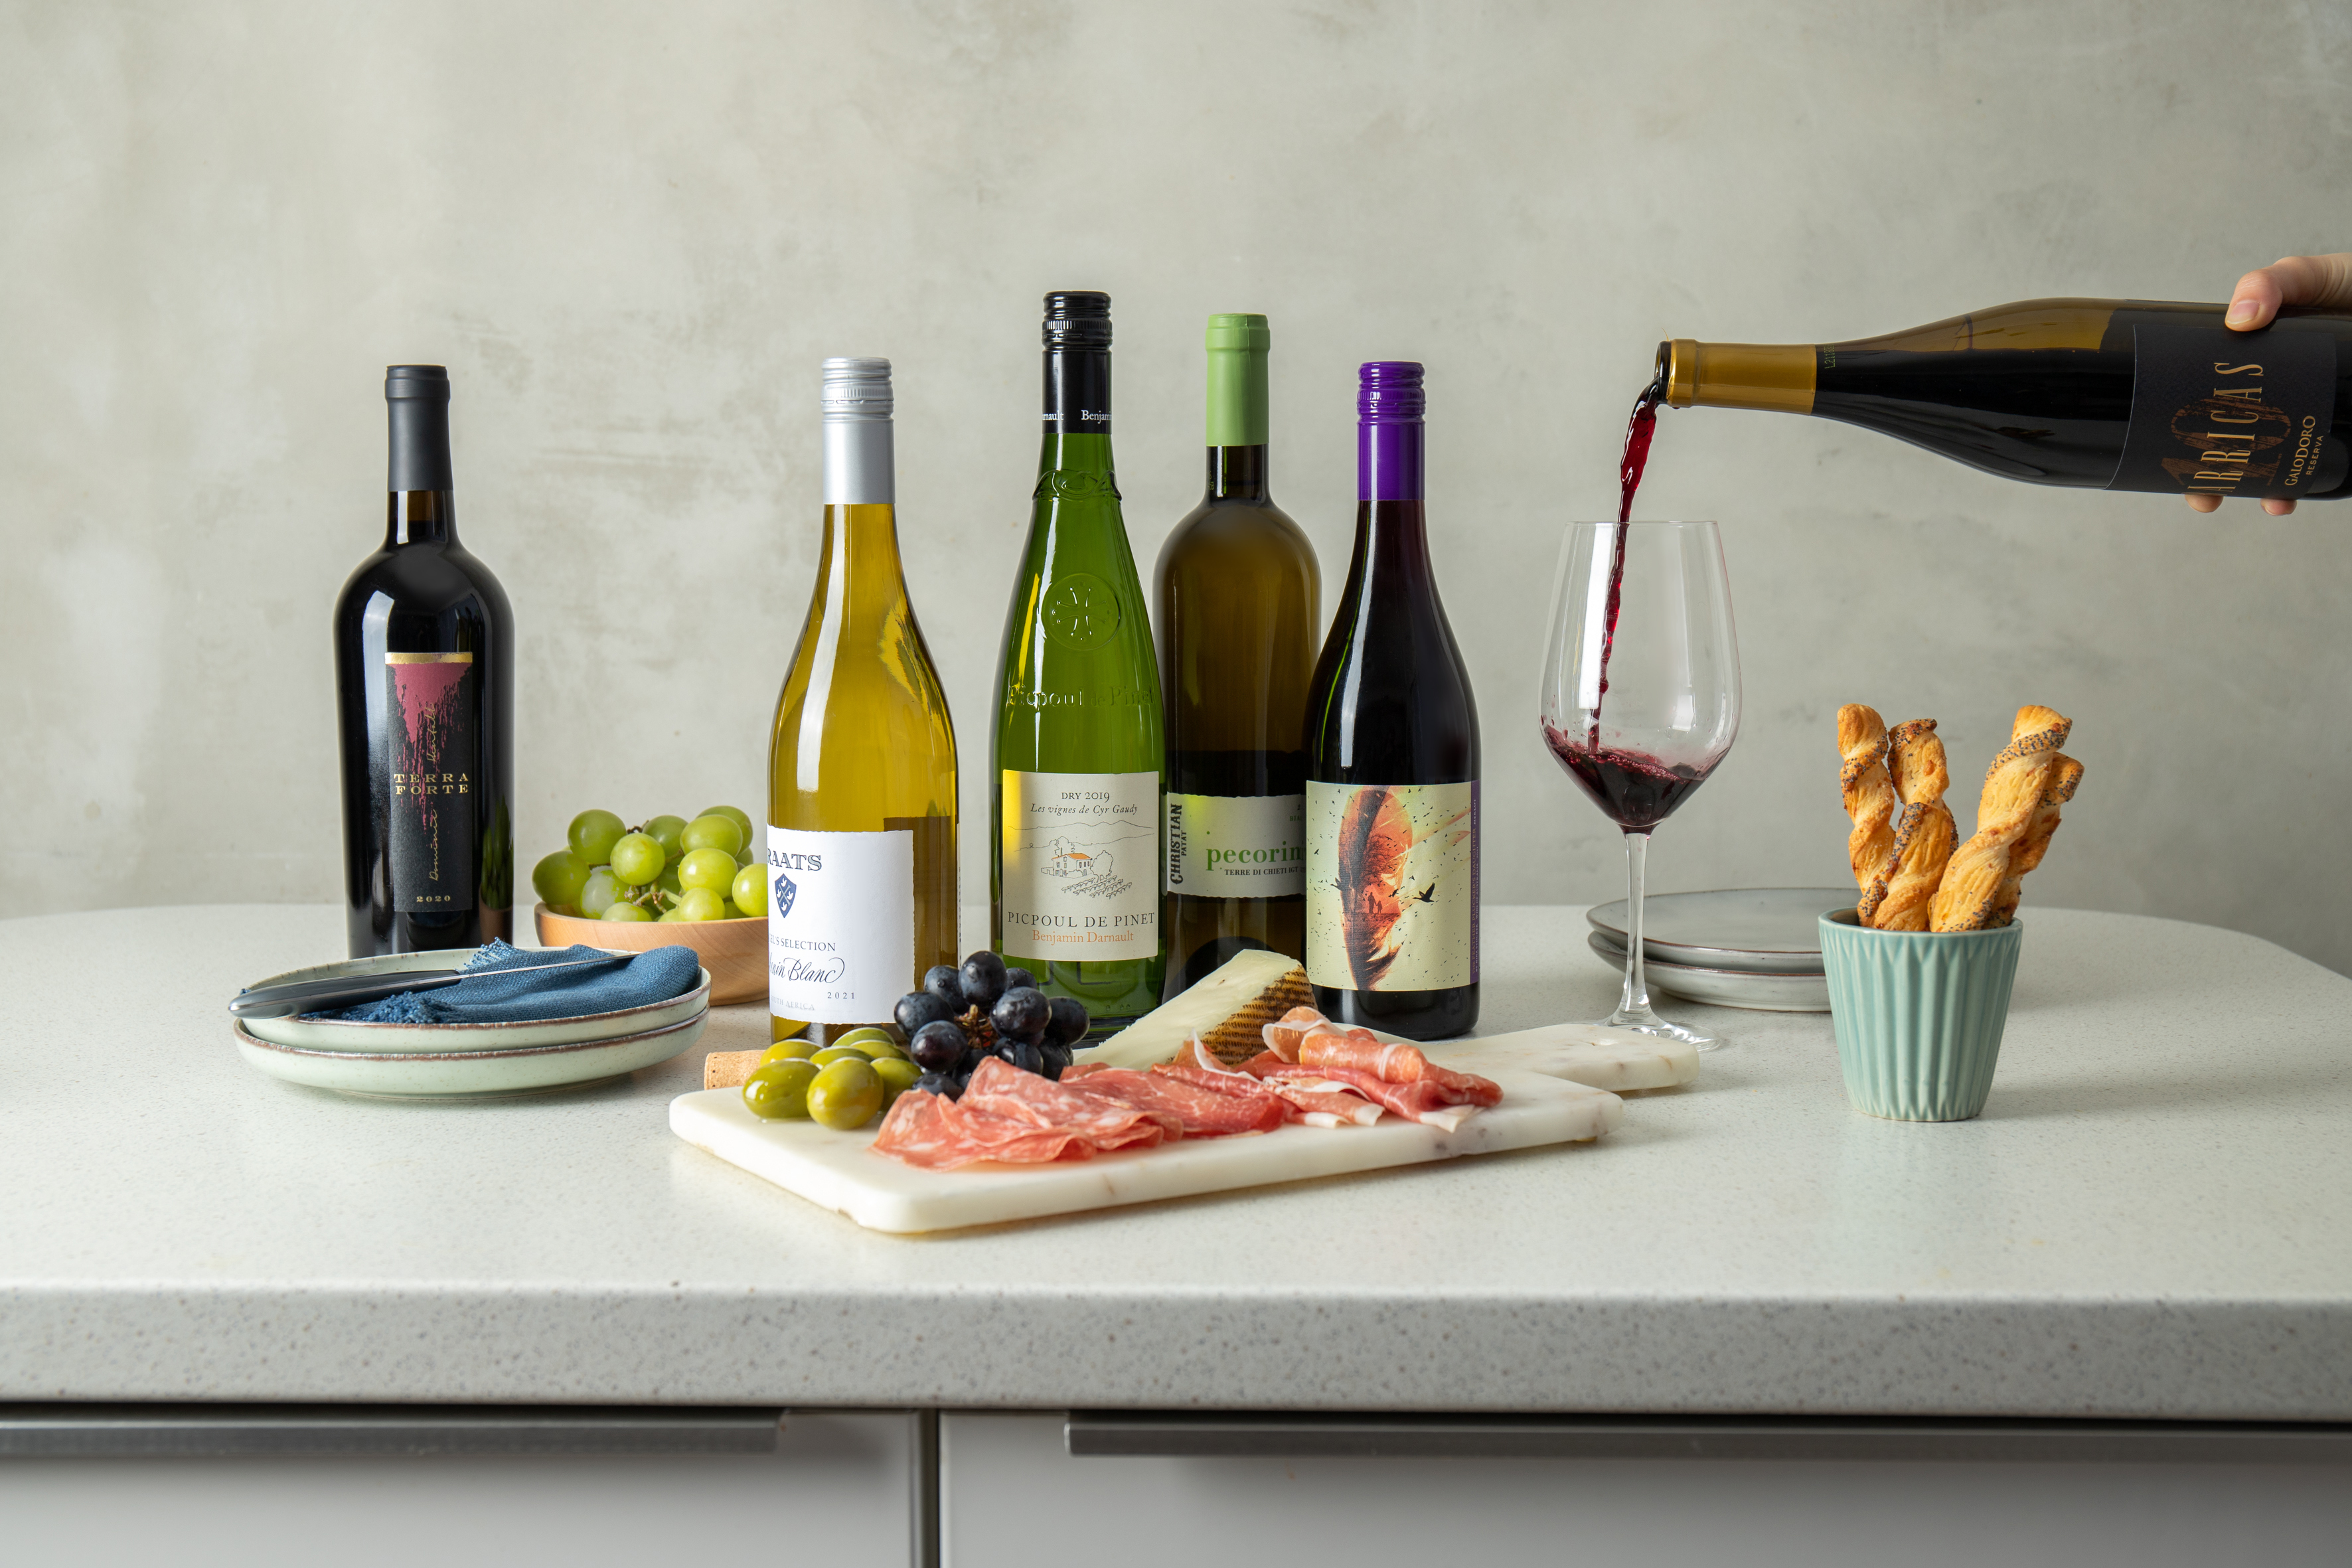 Naked Wines is thrilled to announce an enhanced offer for AARP members. As part of this offer, AARP members will gain access to exclusive customized benefits to elevate their wine experience.